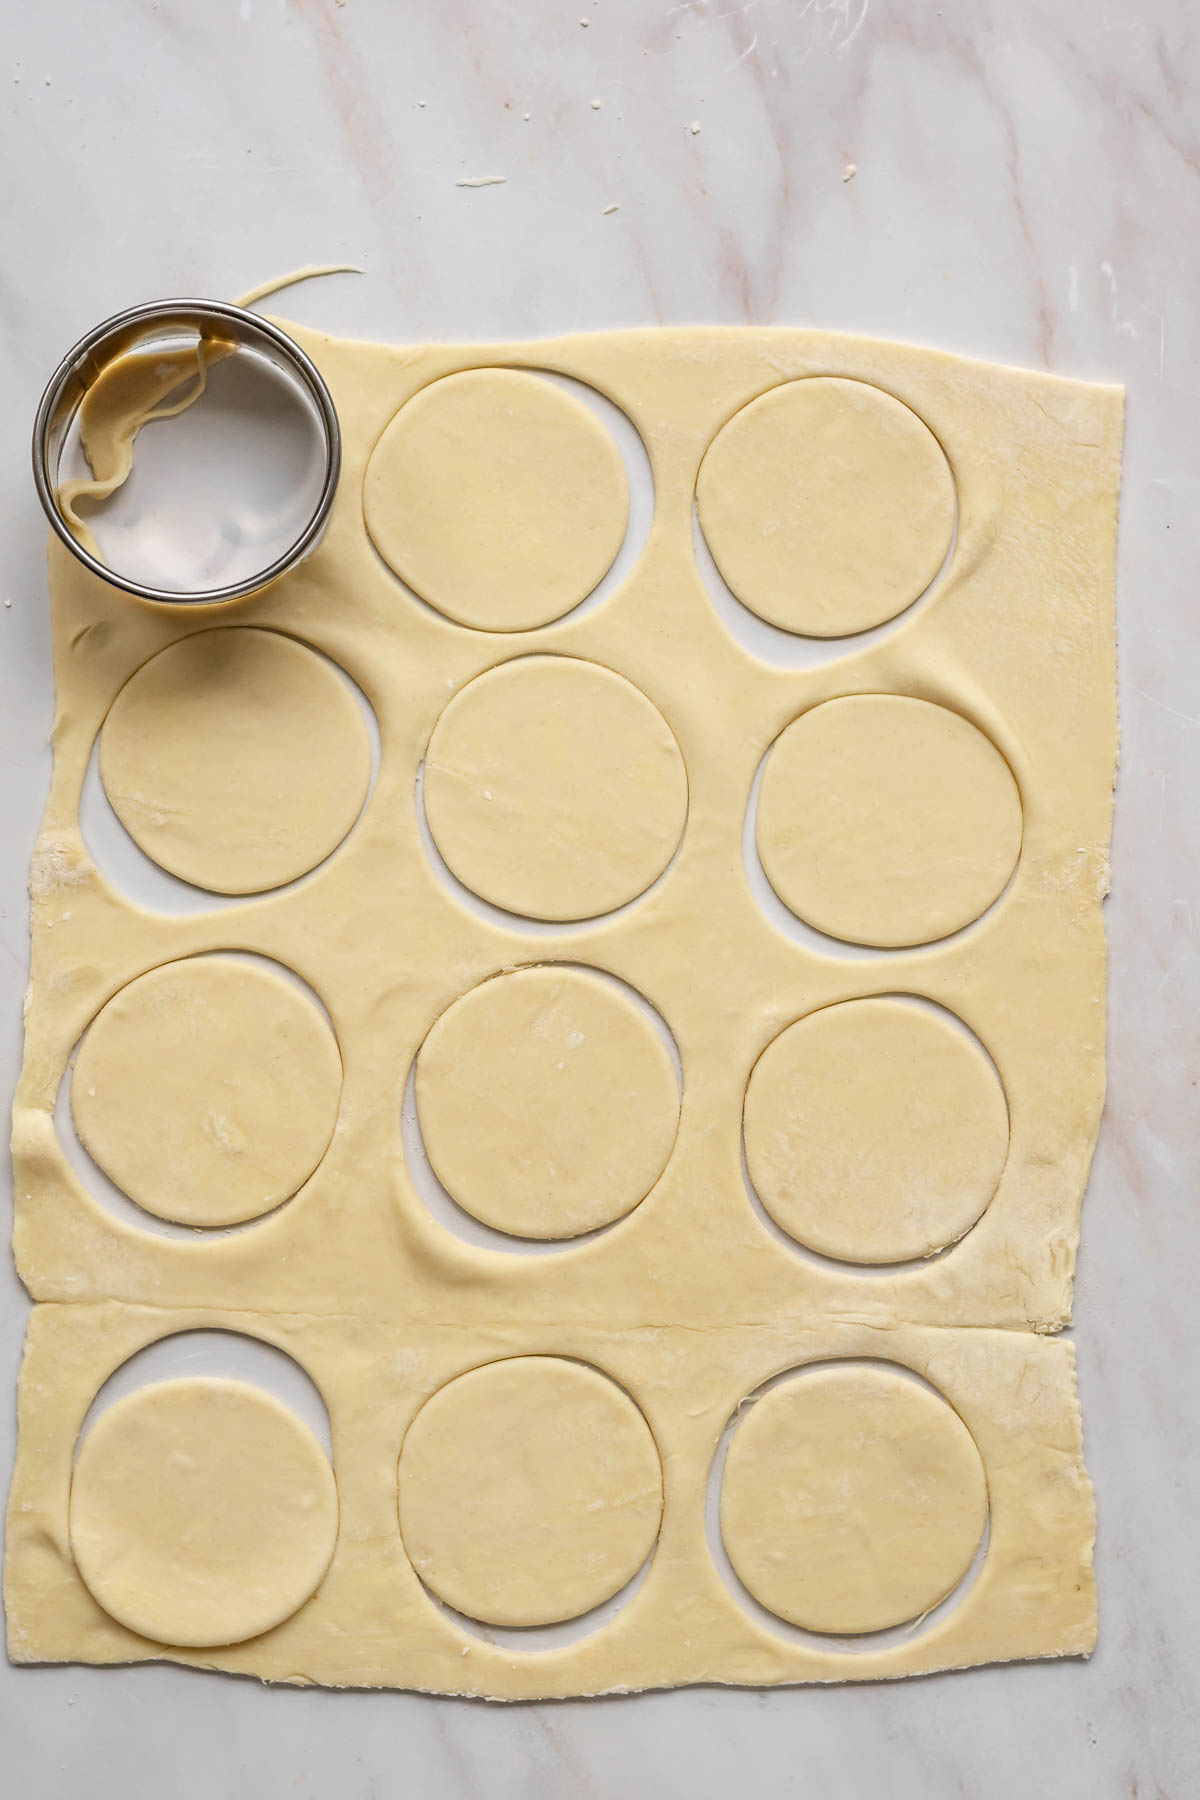 A biscuit cutter cuts out rounds of puff pastry.